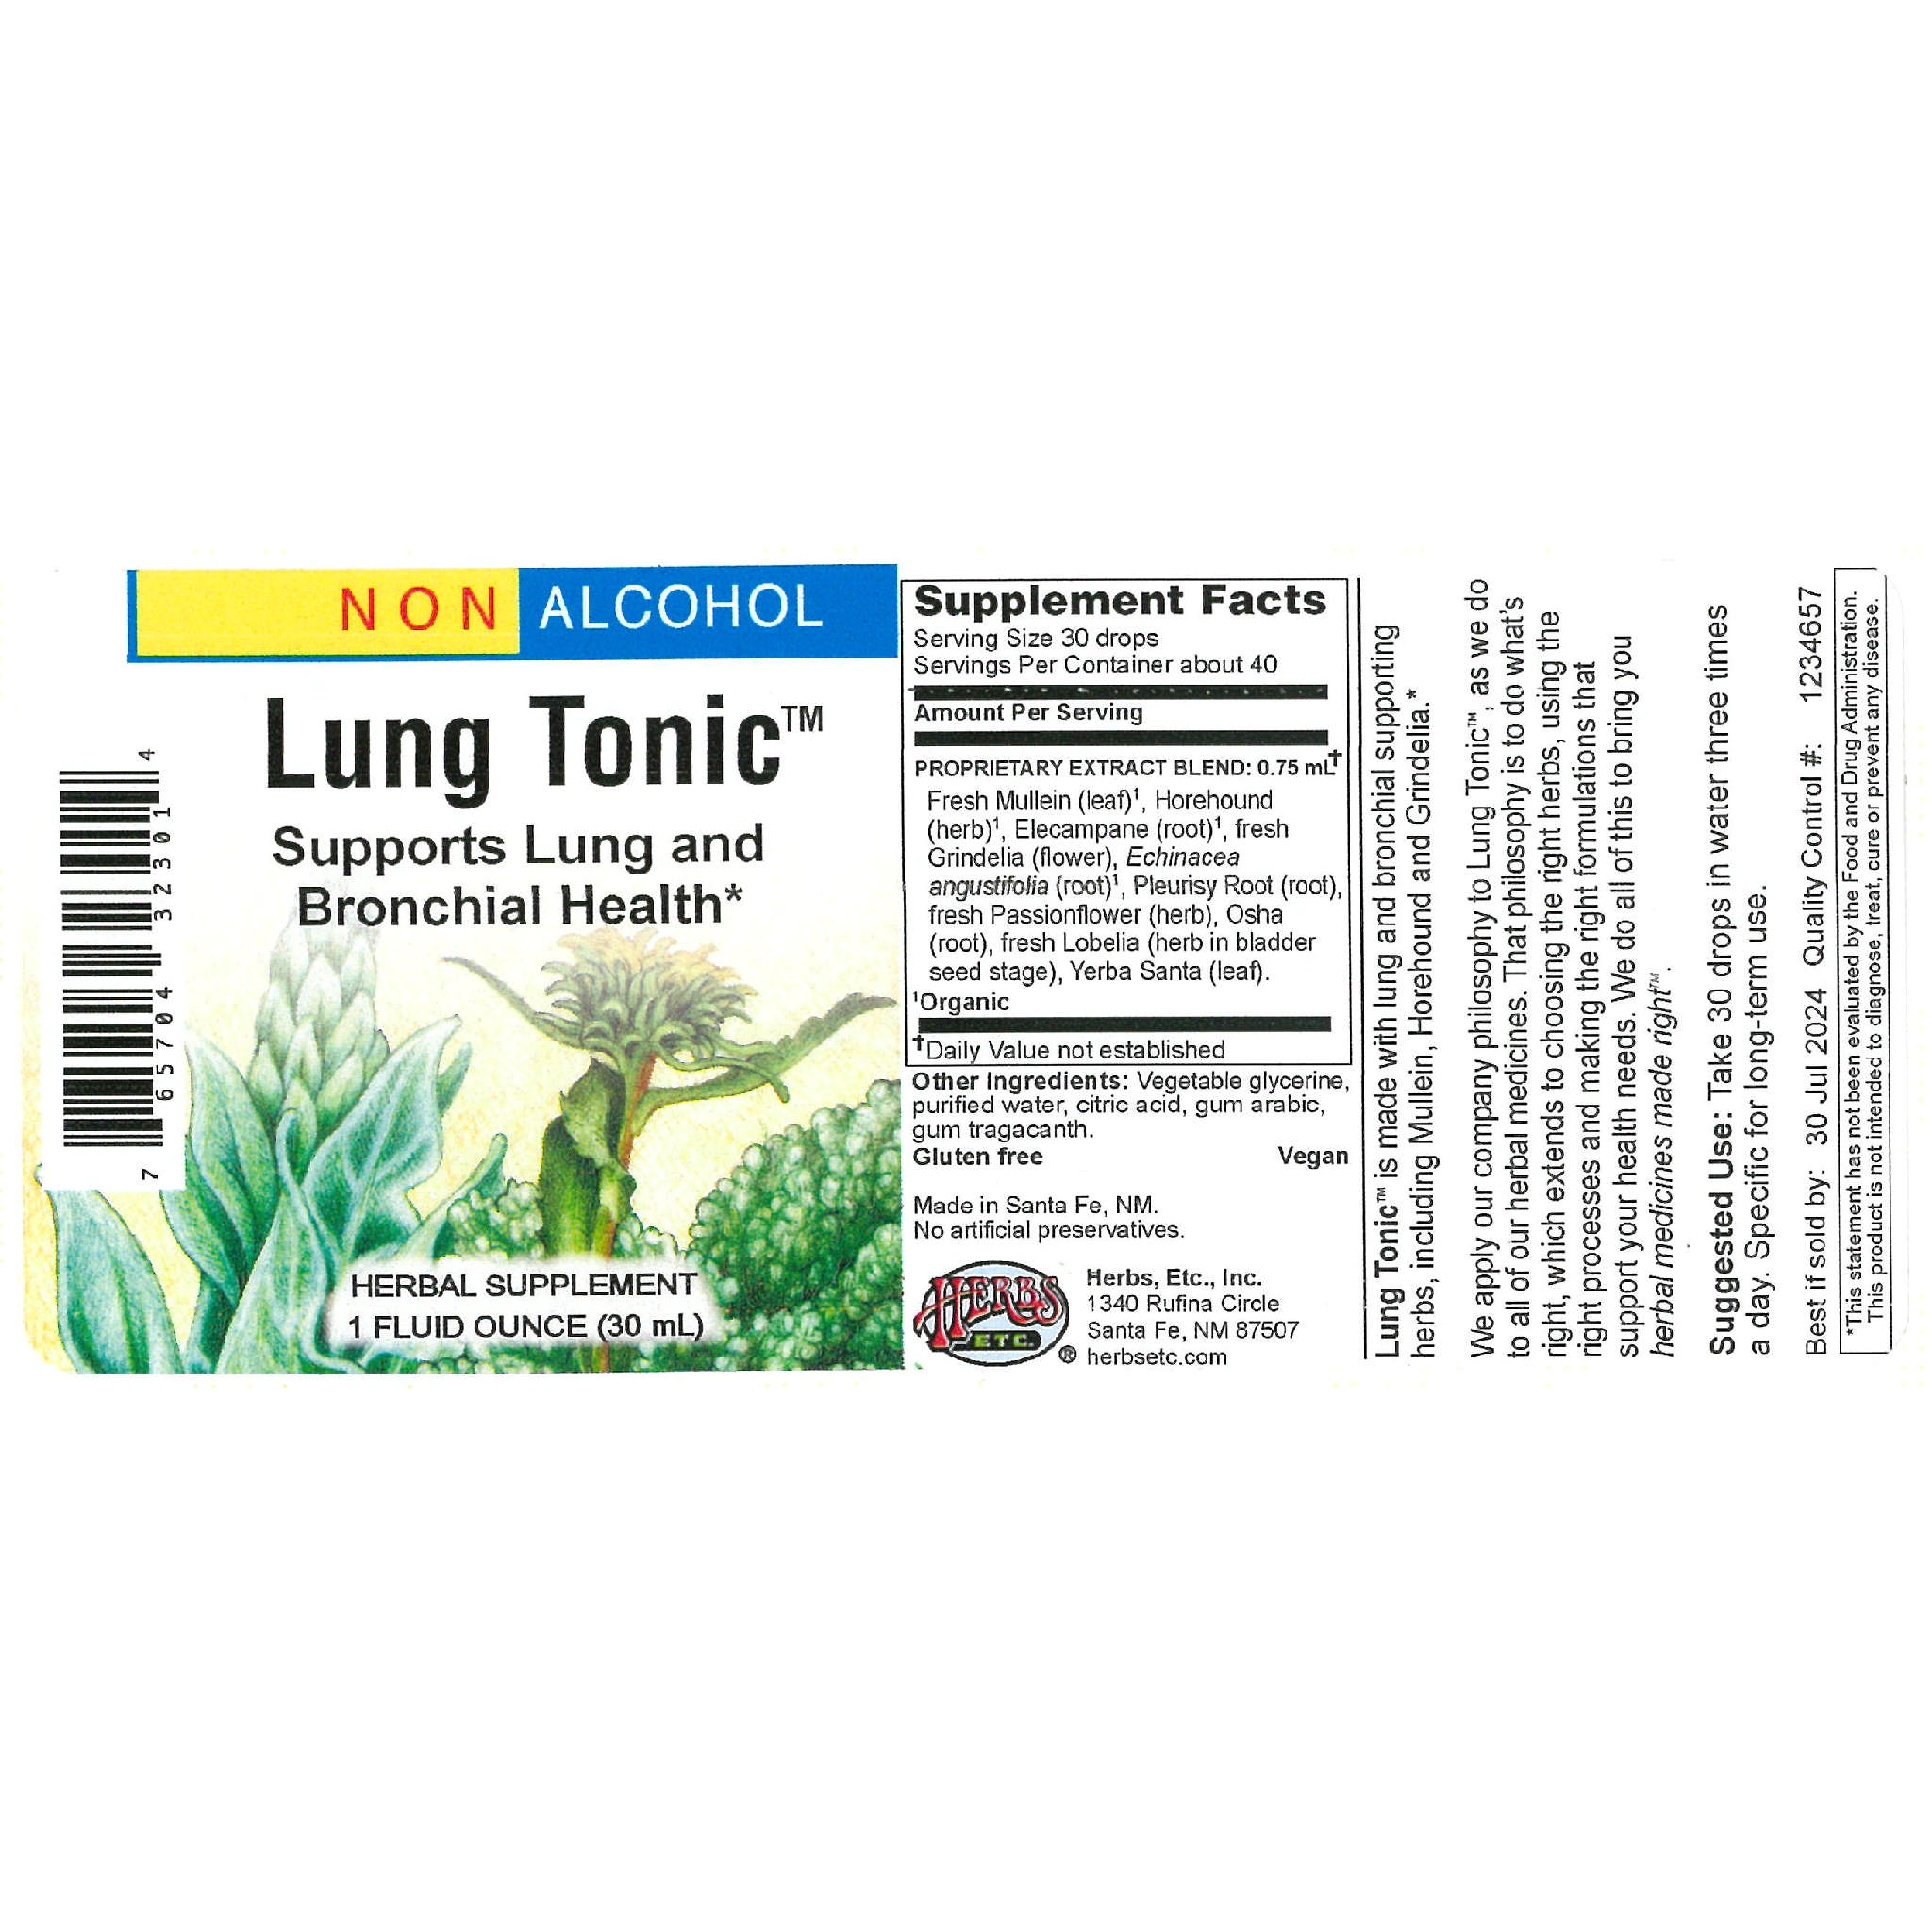 Herbs Etc - Lung Tonic A/F